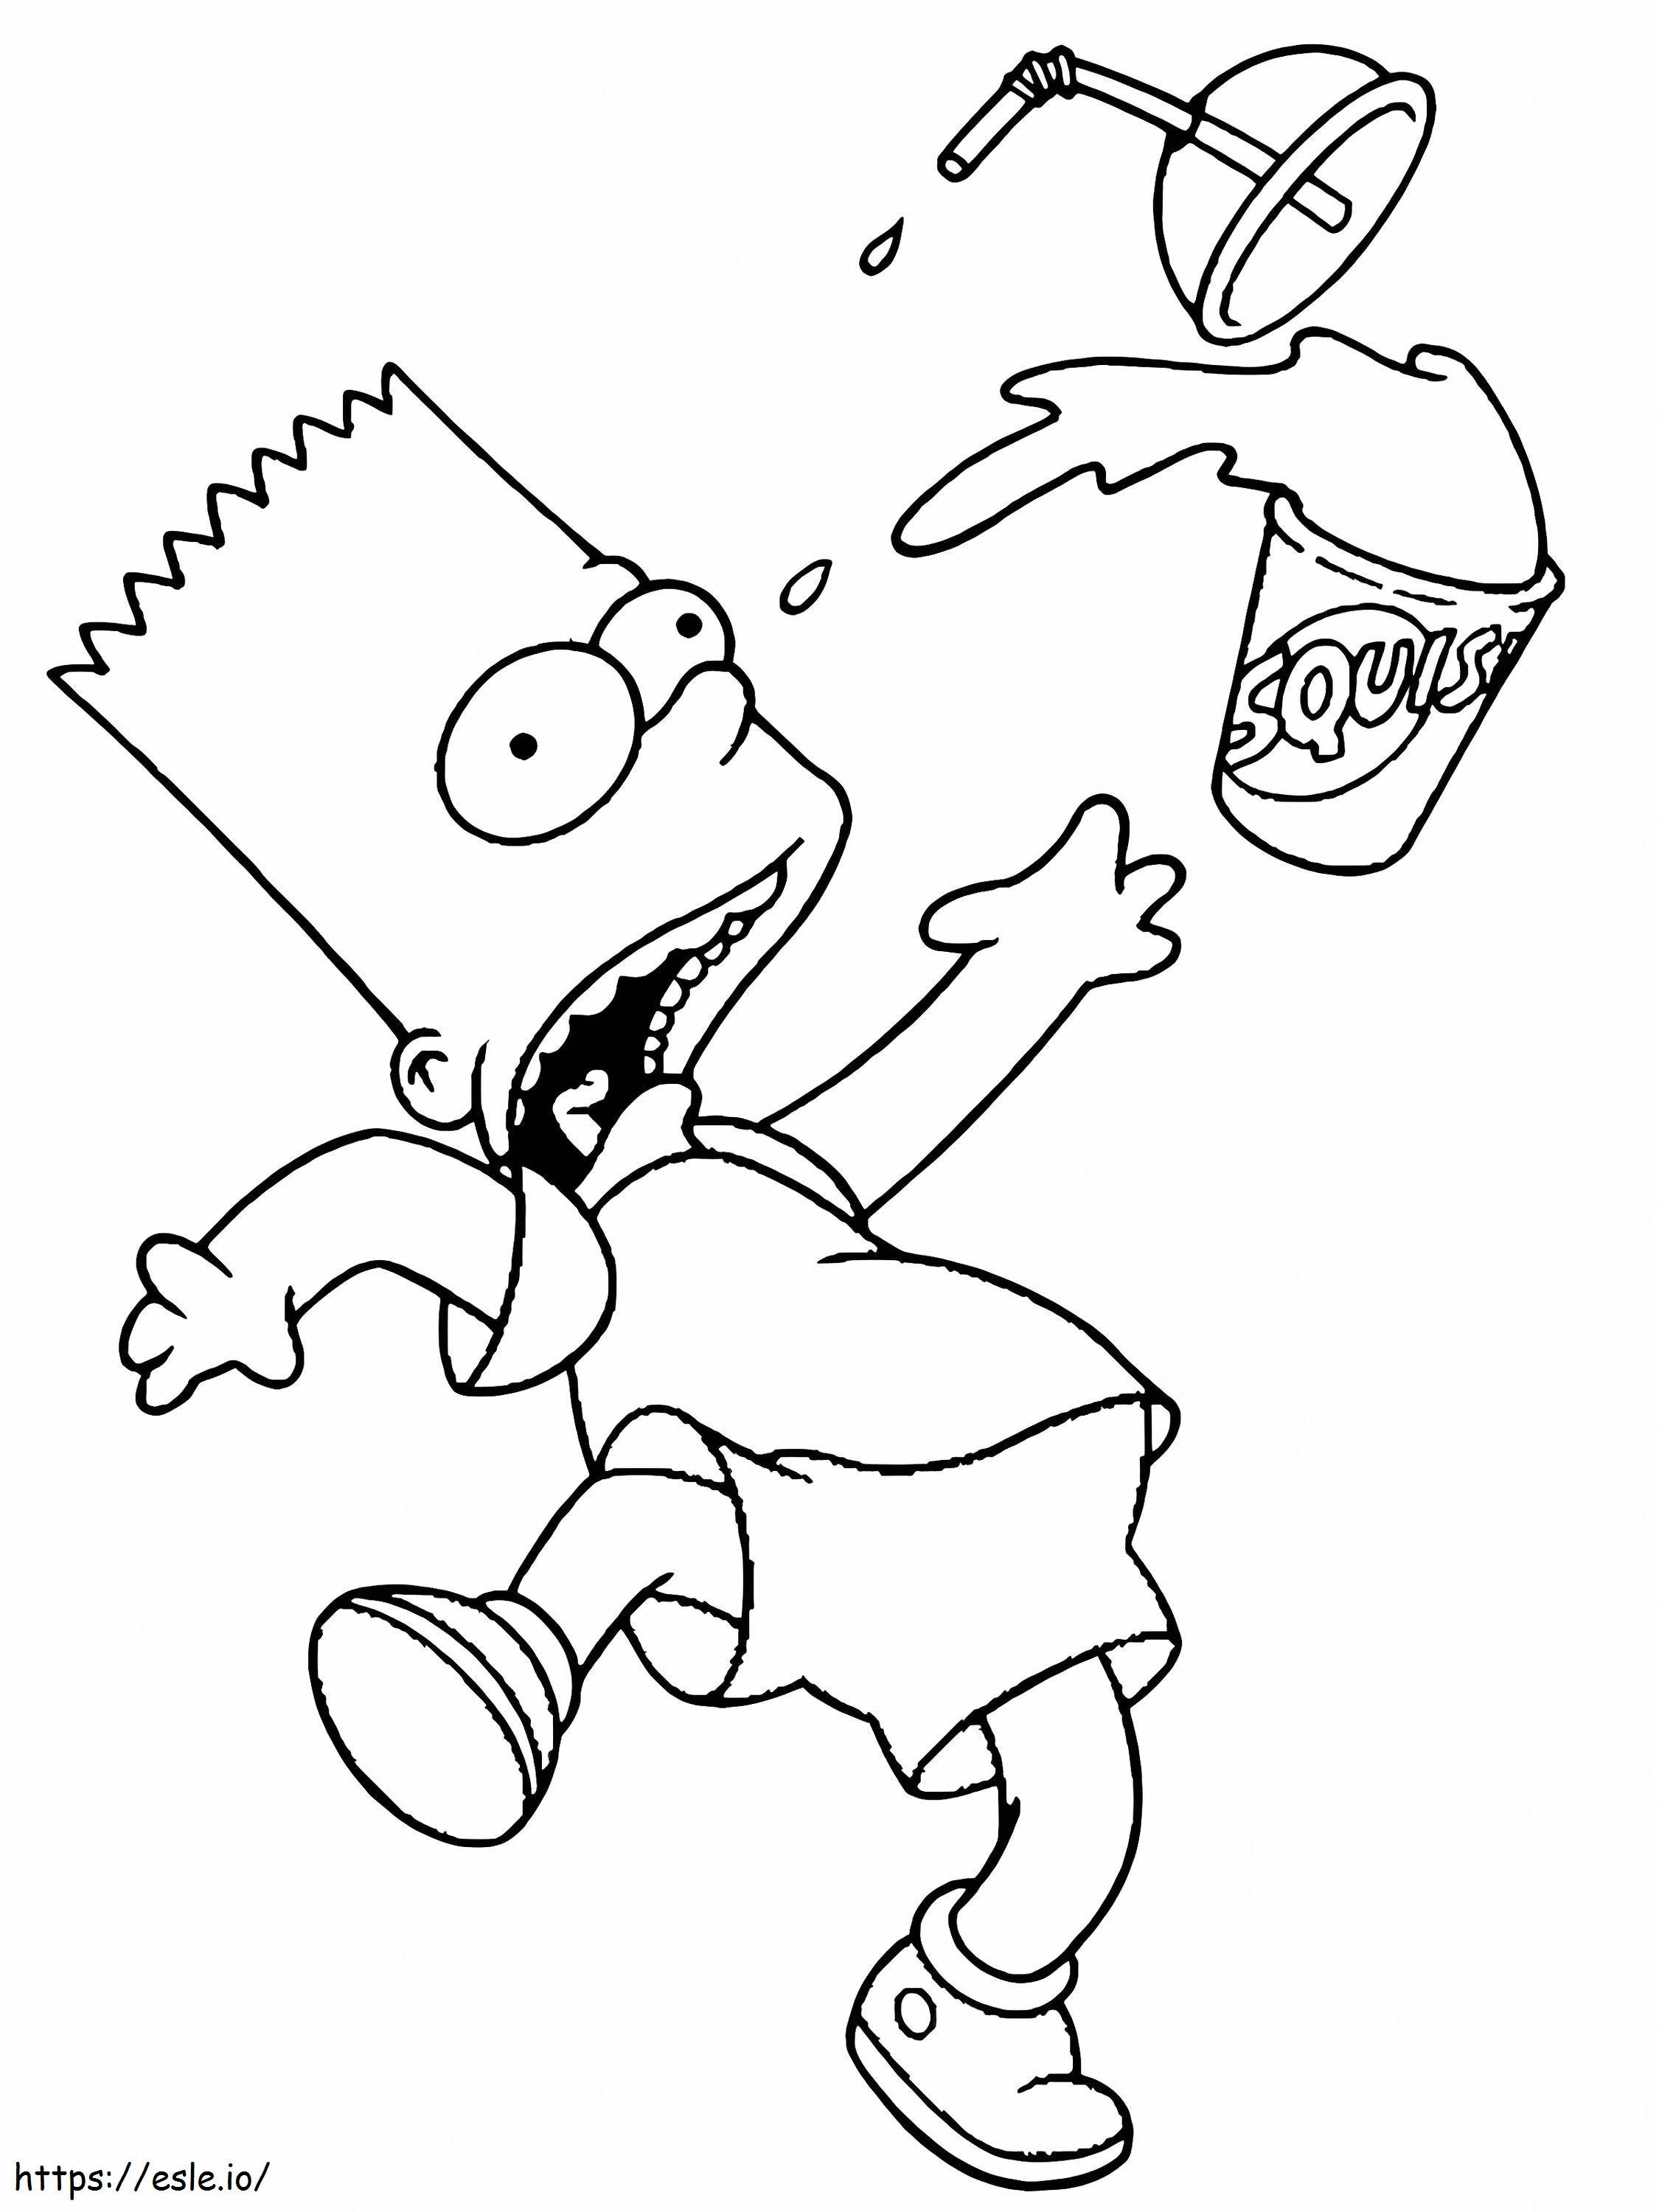 Fear Bart Simpson coloring page